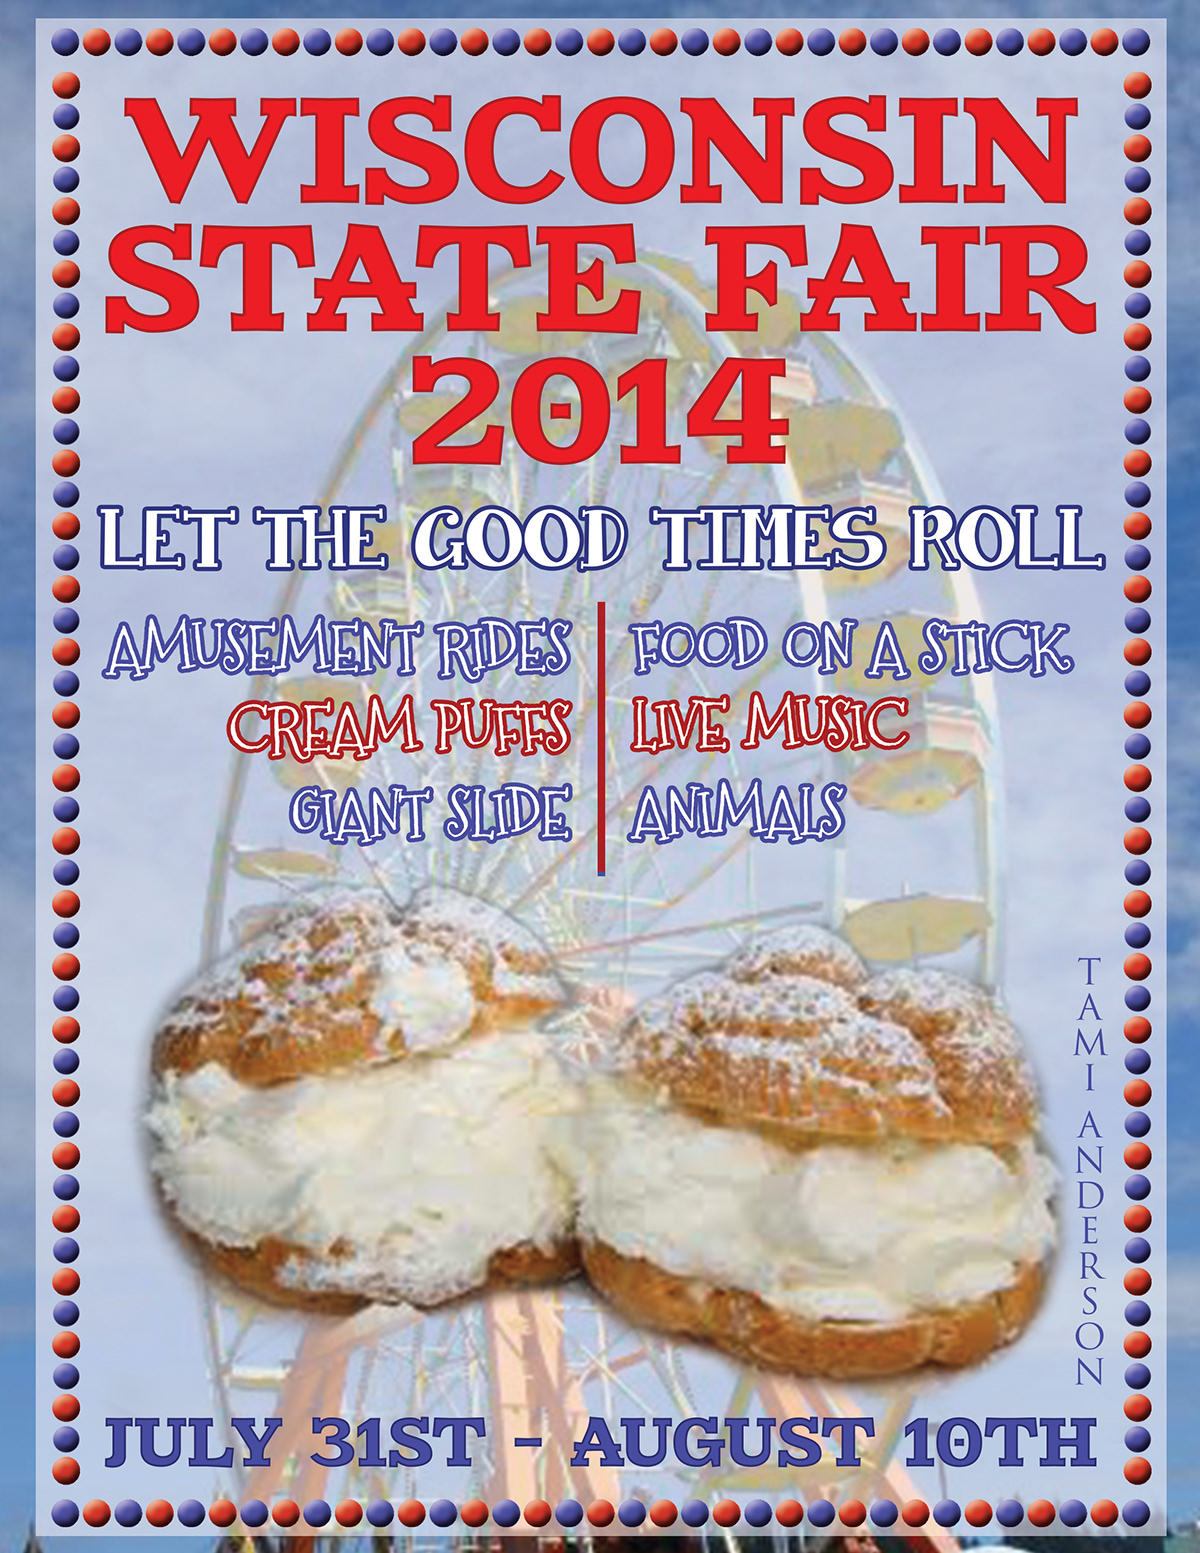 Wisconsin state fair poster contest poster contest cream puffs food on a stick amusement rides giant slide Livestock livemusic live music